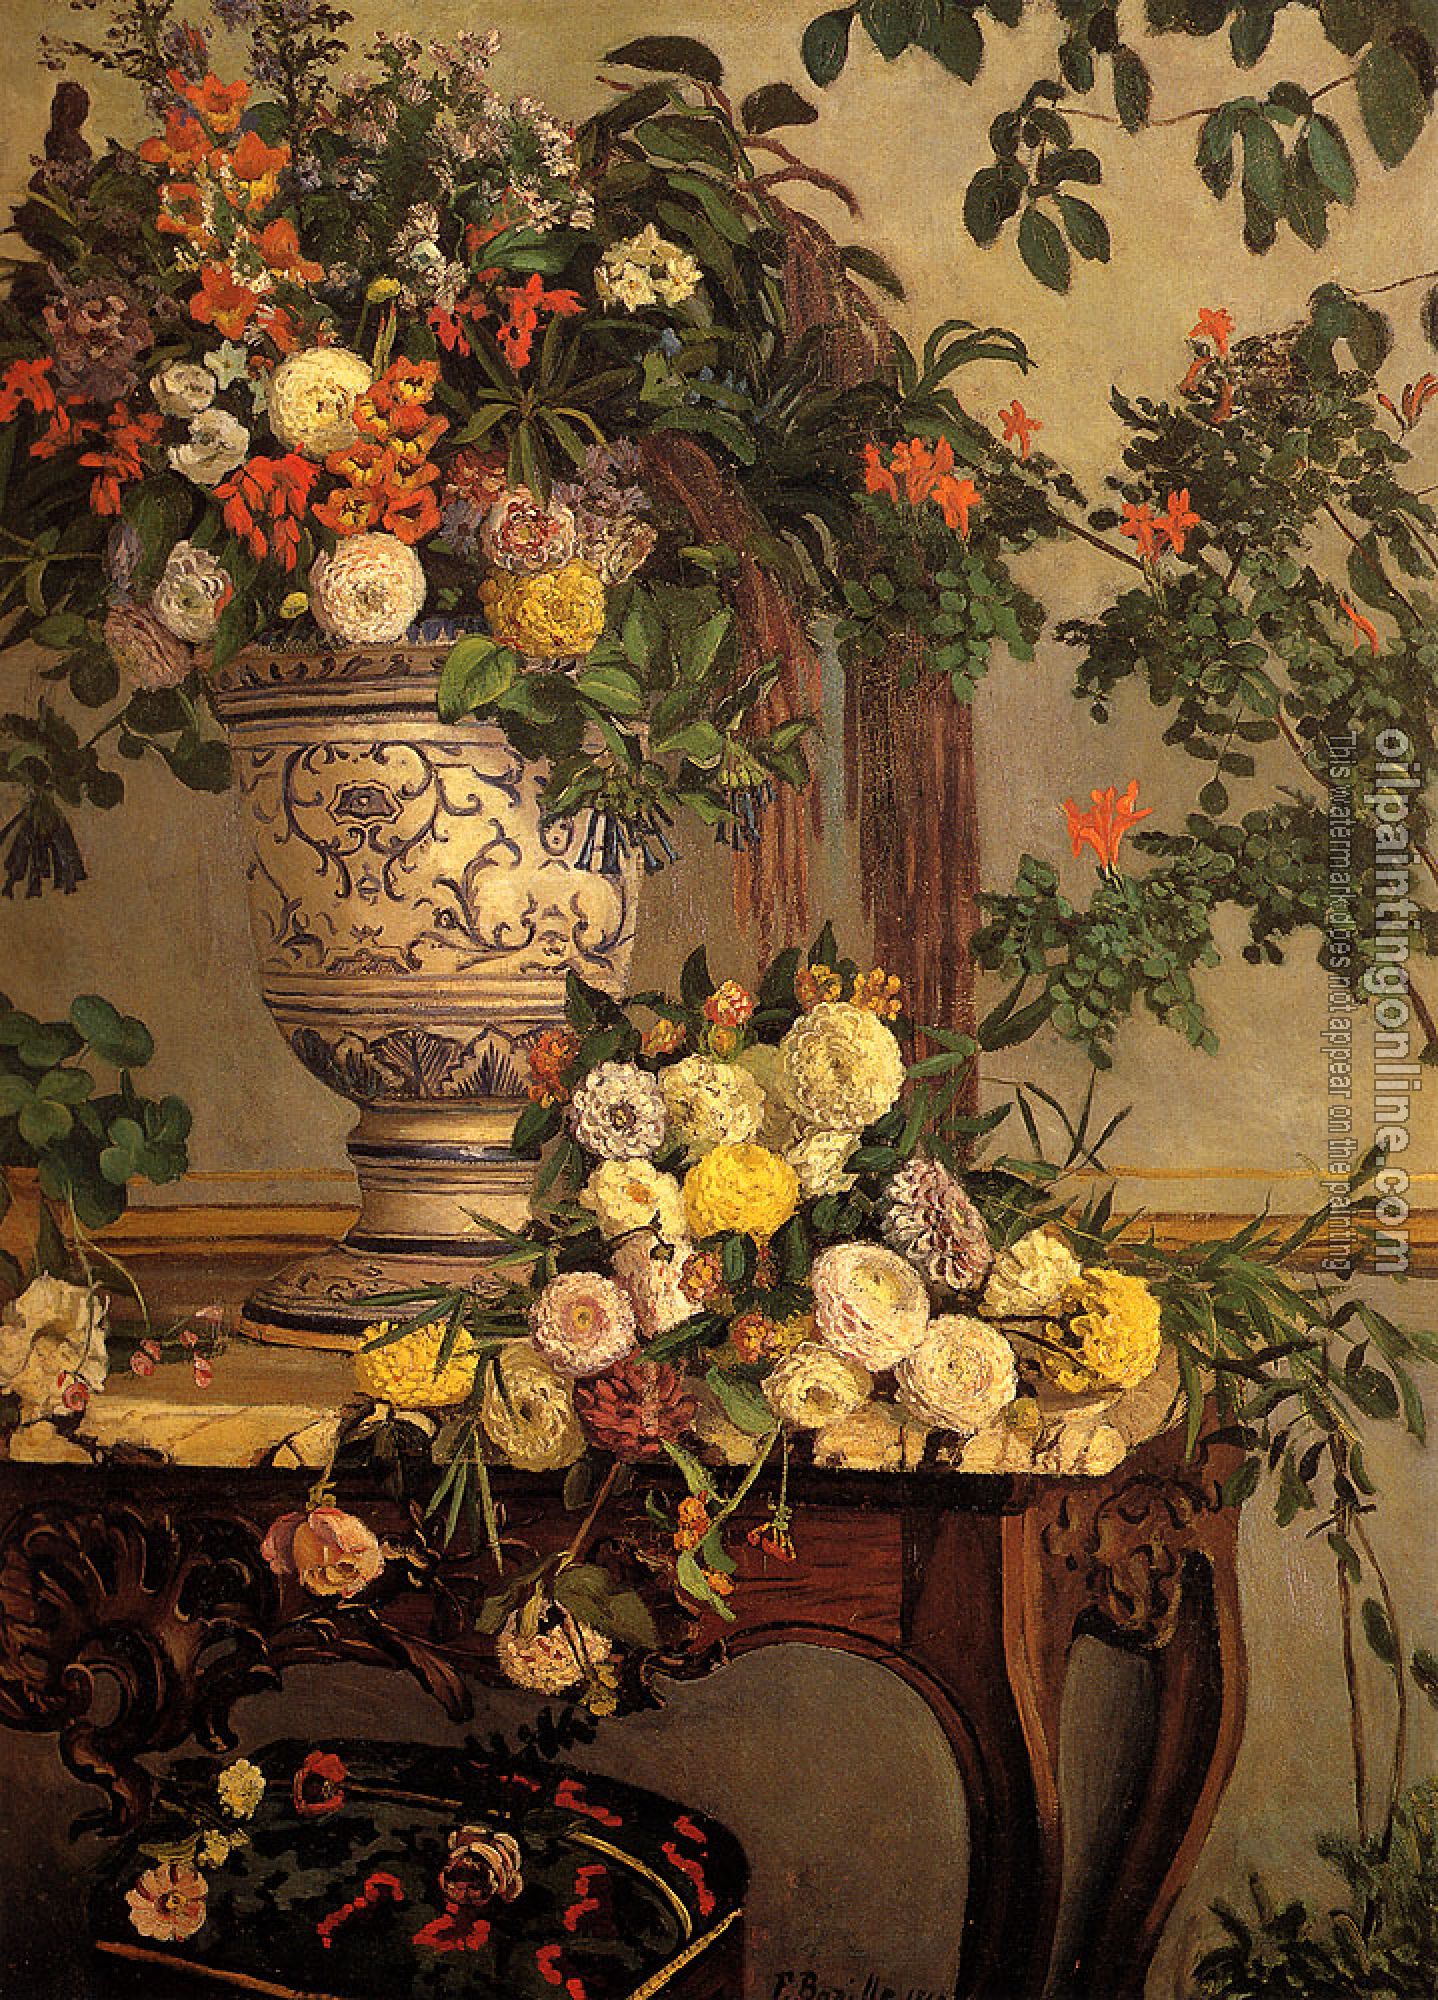 Bazille, Frederic - Flowers